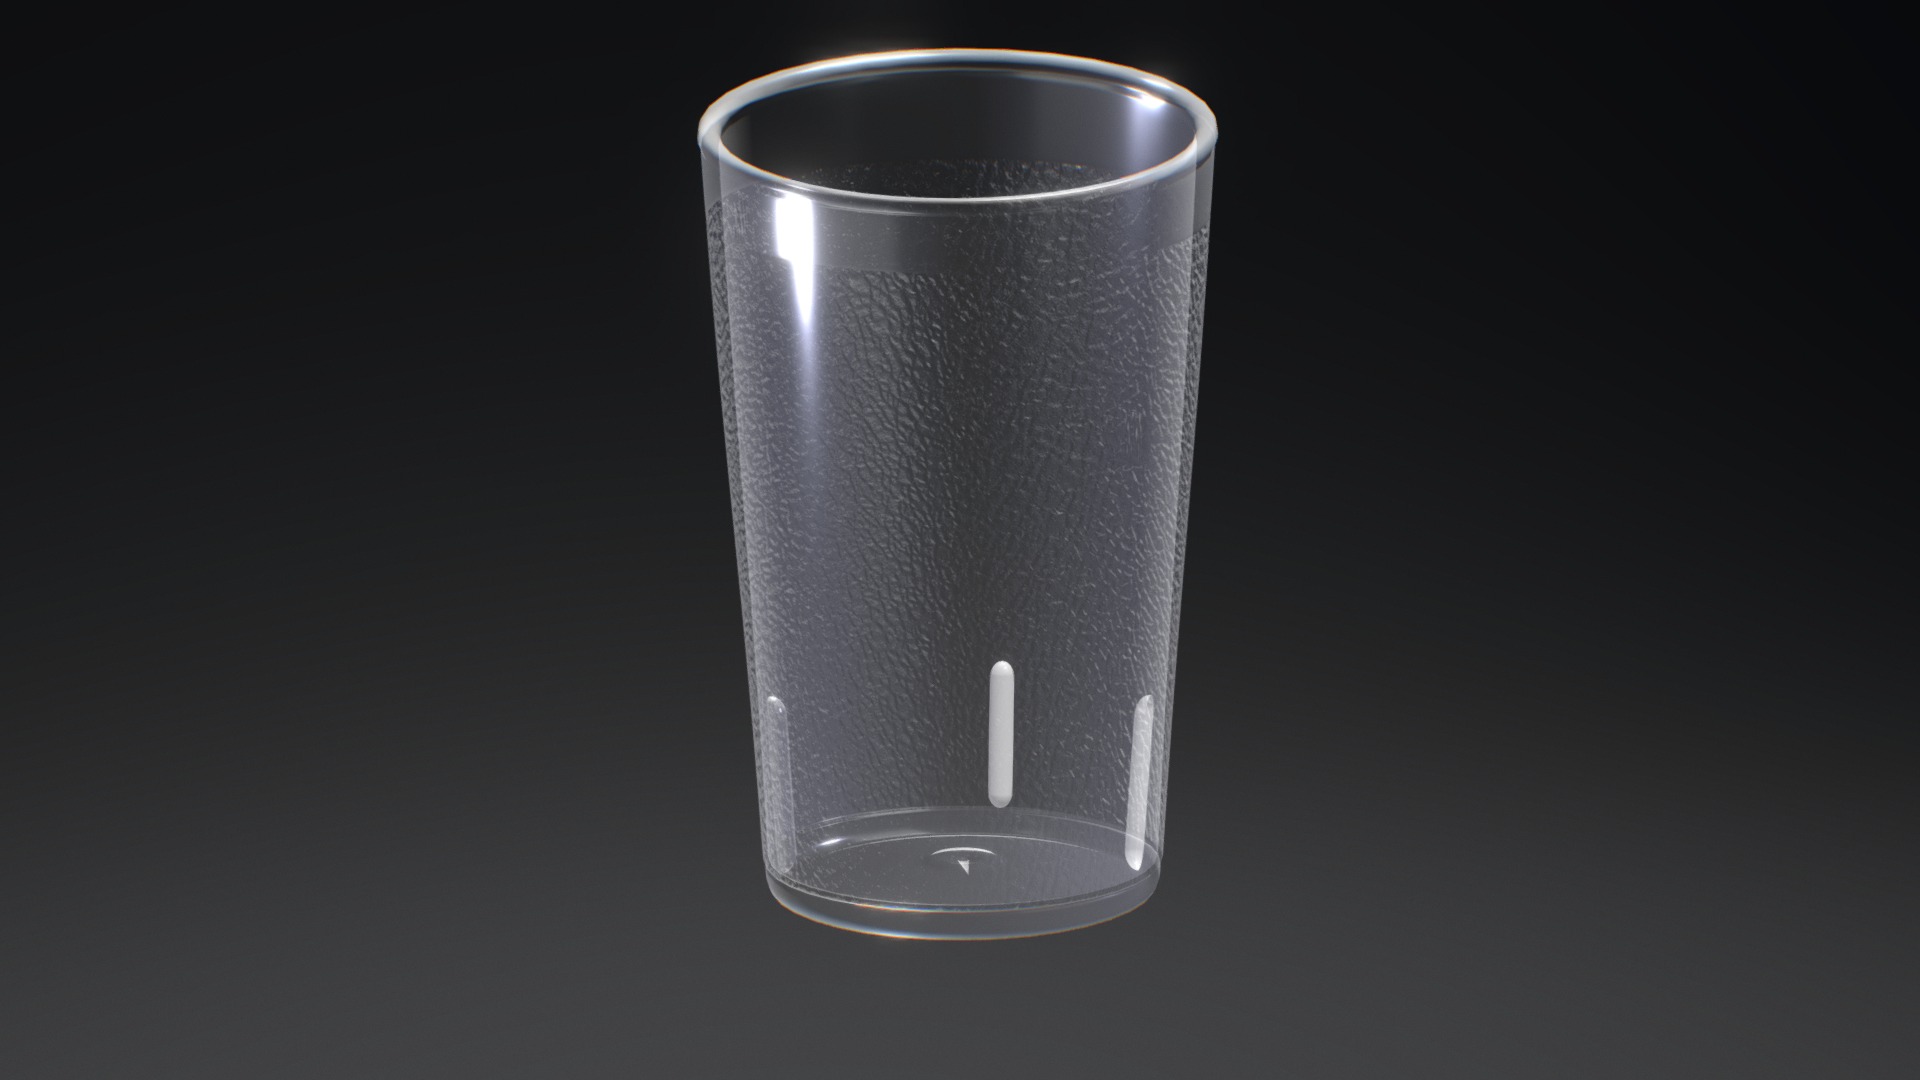 3D model Vaso de Policarbonato 9oz - This is a 3D model of the Vaso de Policarbonato 9oz. The 3D model is about a glass with a liquid in it.